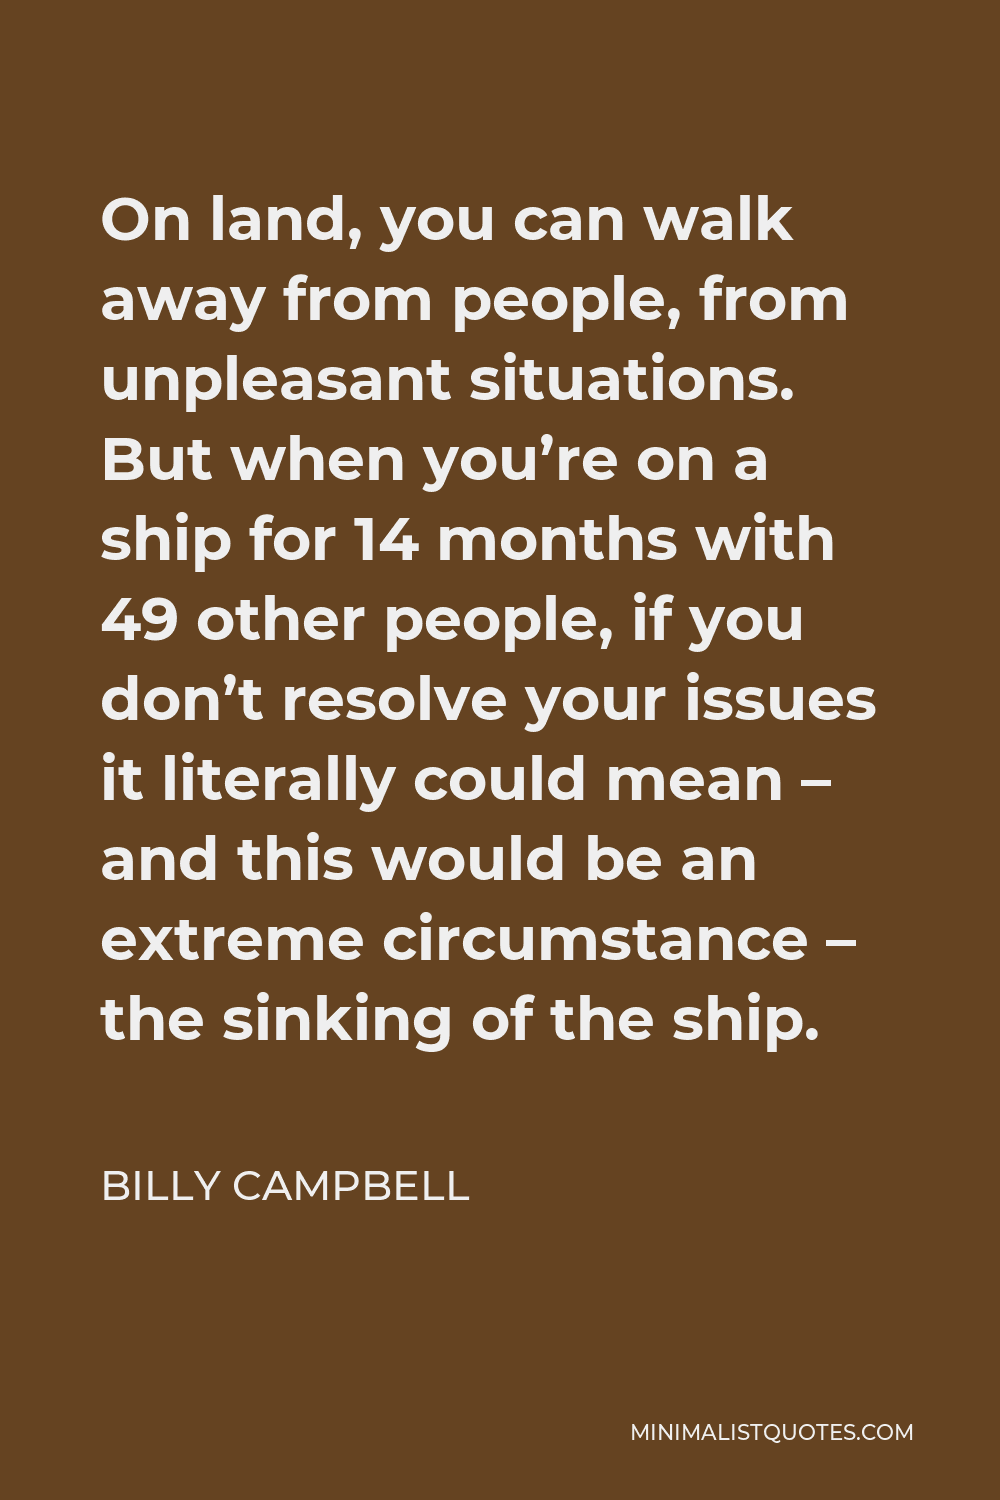 Billy Campbell Quote - On land, you can walk away from people, from unpleasant situations. But when you’re on a ship for 14 months with 49 other people, if you don’t resolve your issues it literally could mean – and this would be an extreme circumstance – the sinking of the ship.